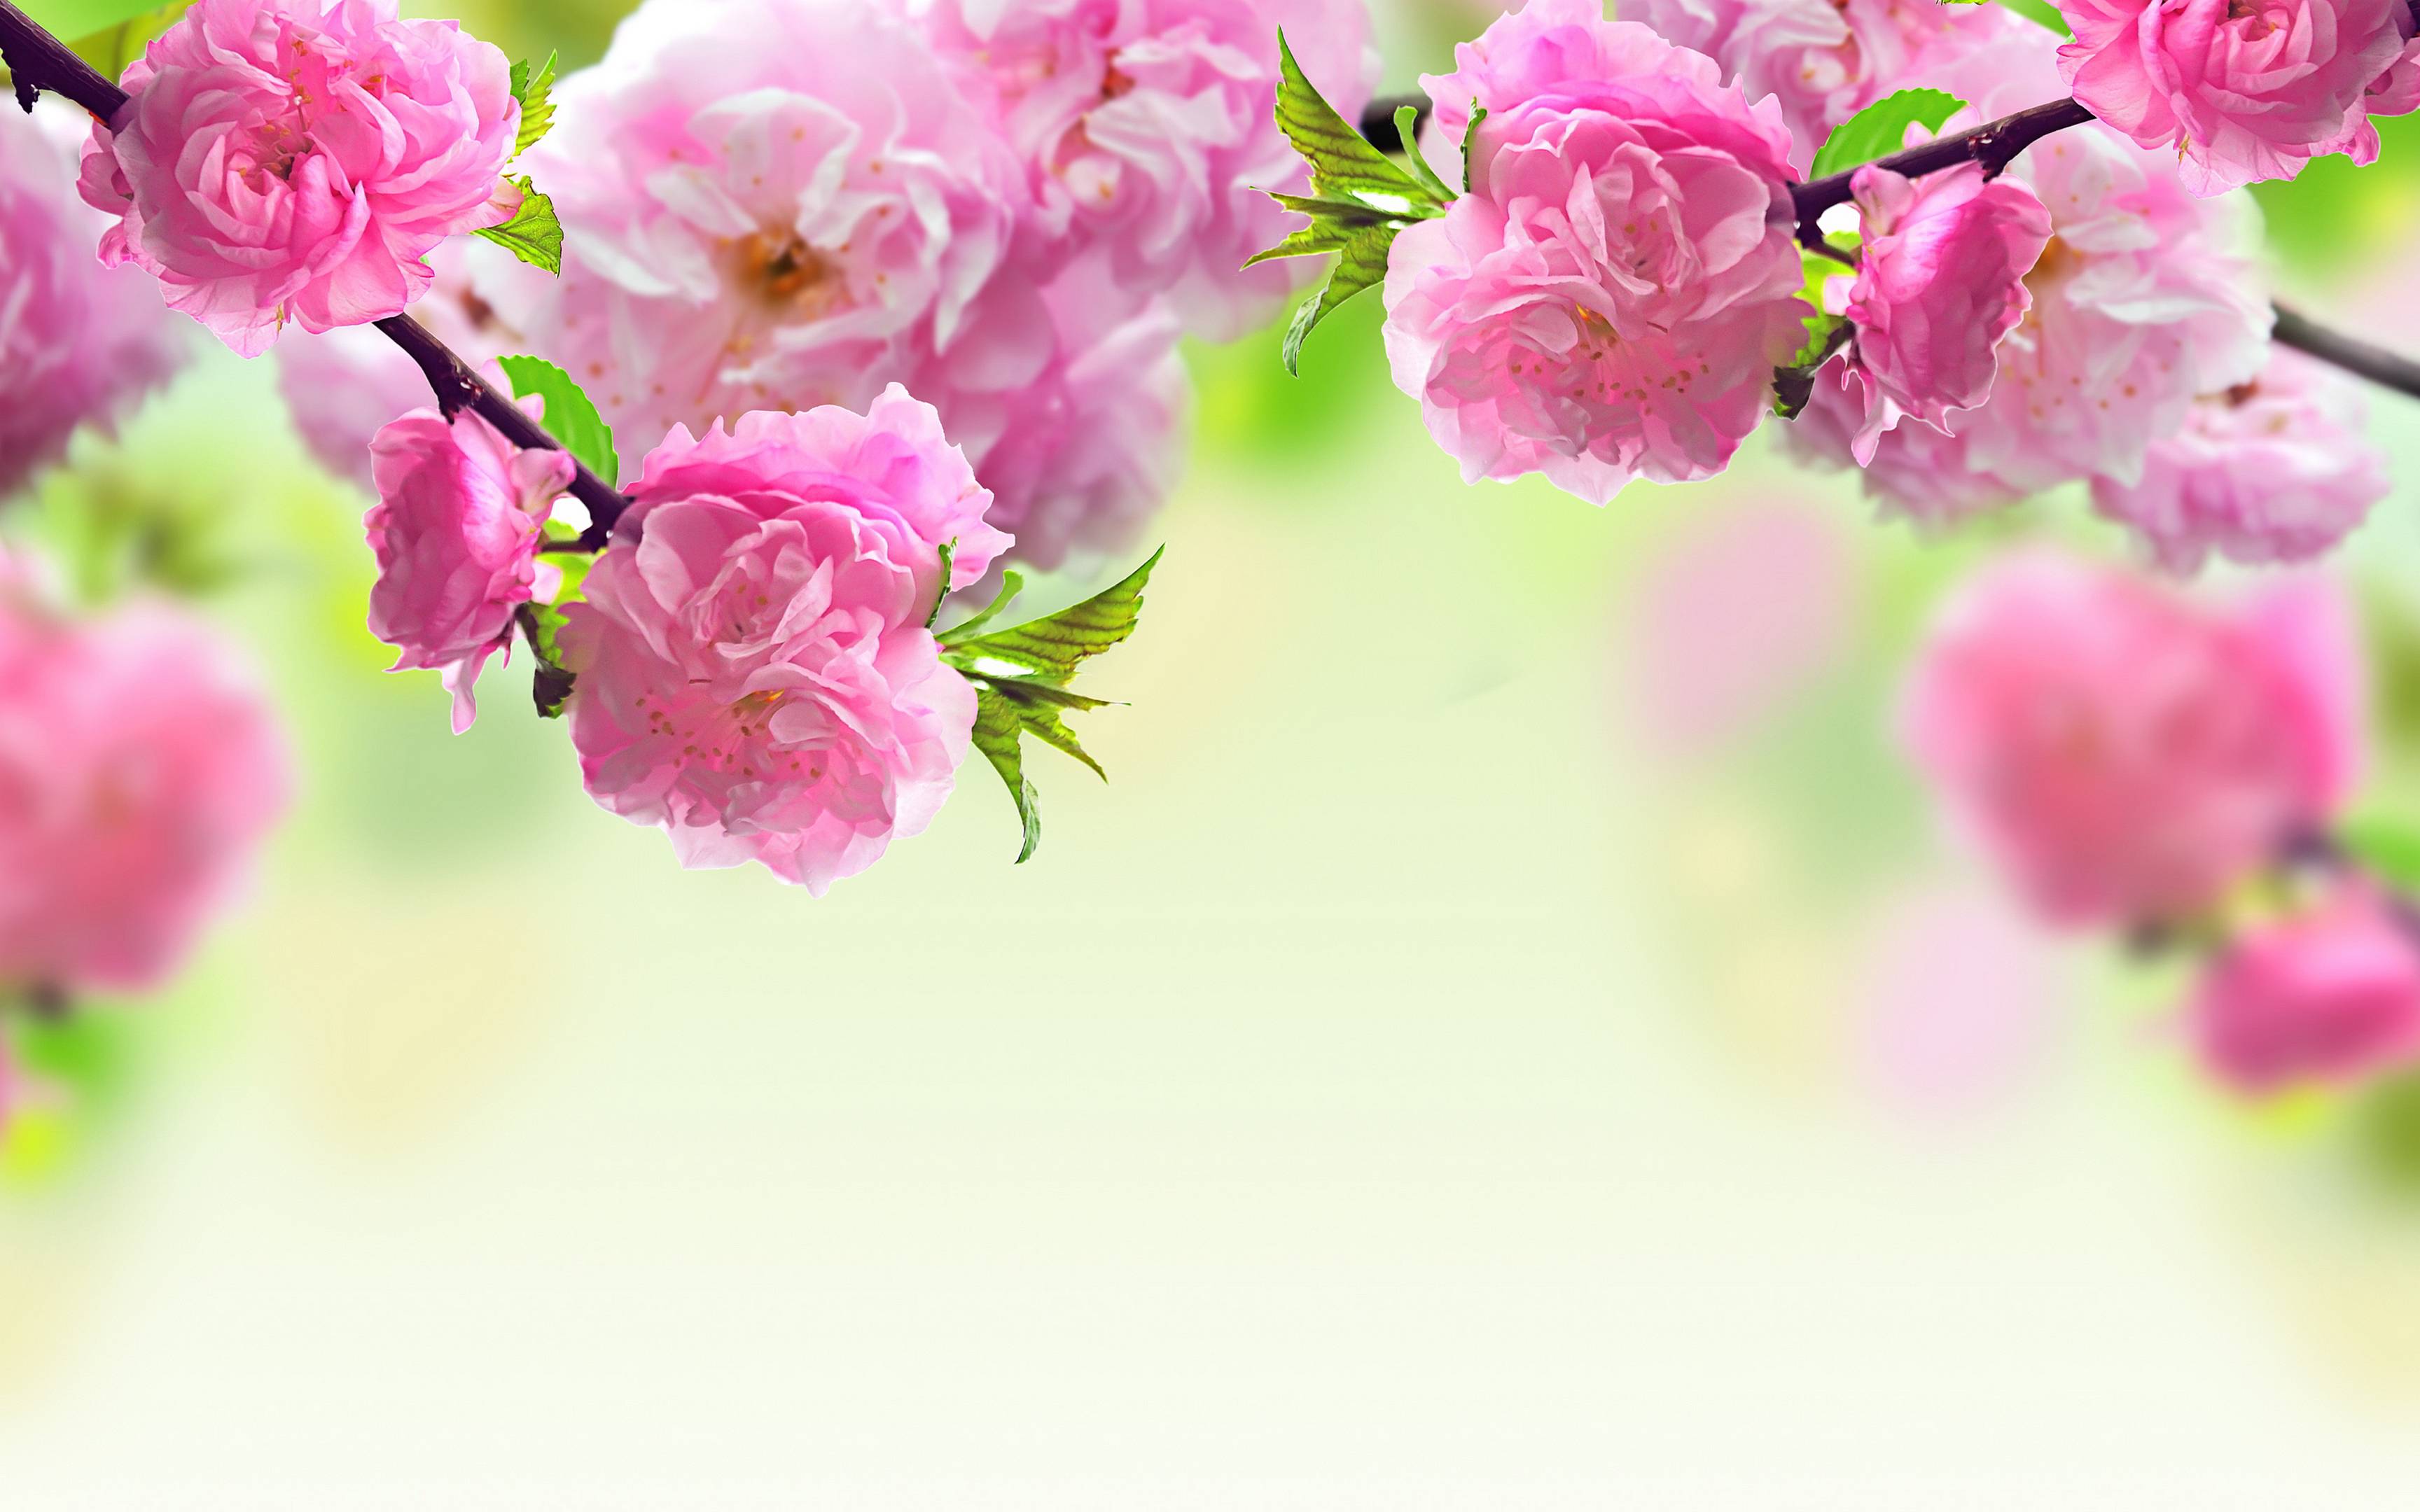 Flowers Backgrounds Wallpapers - Wallpaper Cave